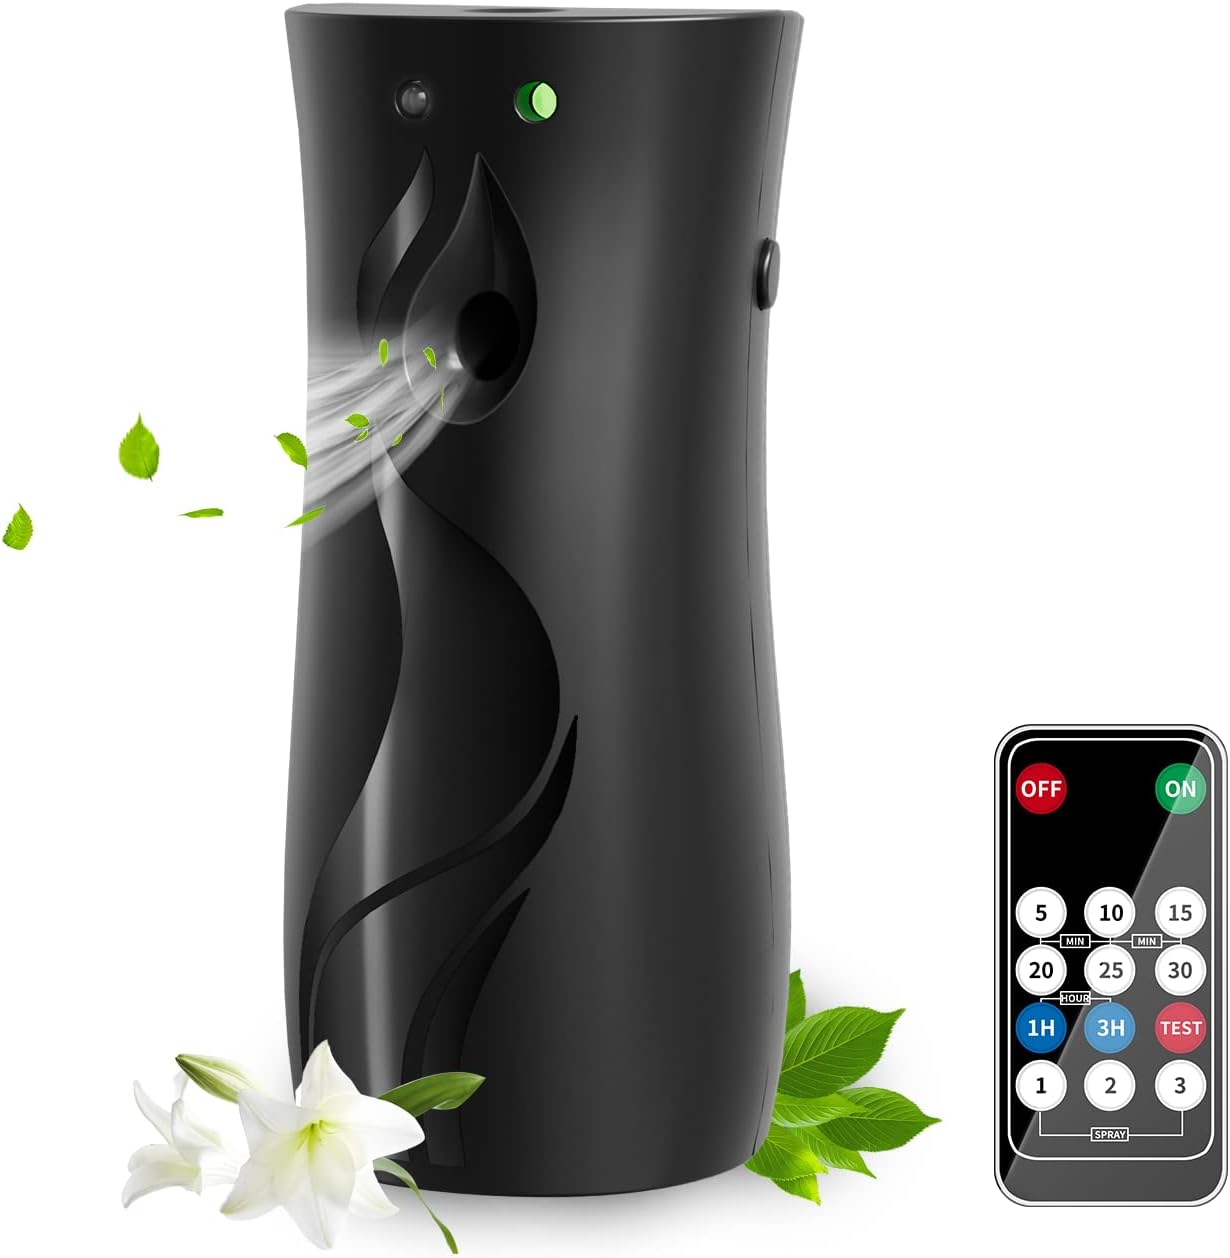 Automatic Air Freshener Spray Dispenser, Wall/Standing Battery Powered Aerosol Spray Dispenser with Remote Control for Bathroom, Hotel, Office, Commercial (Black)